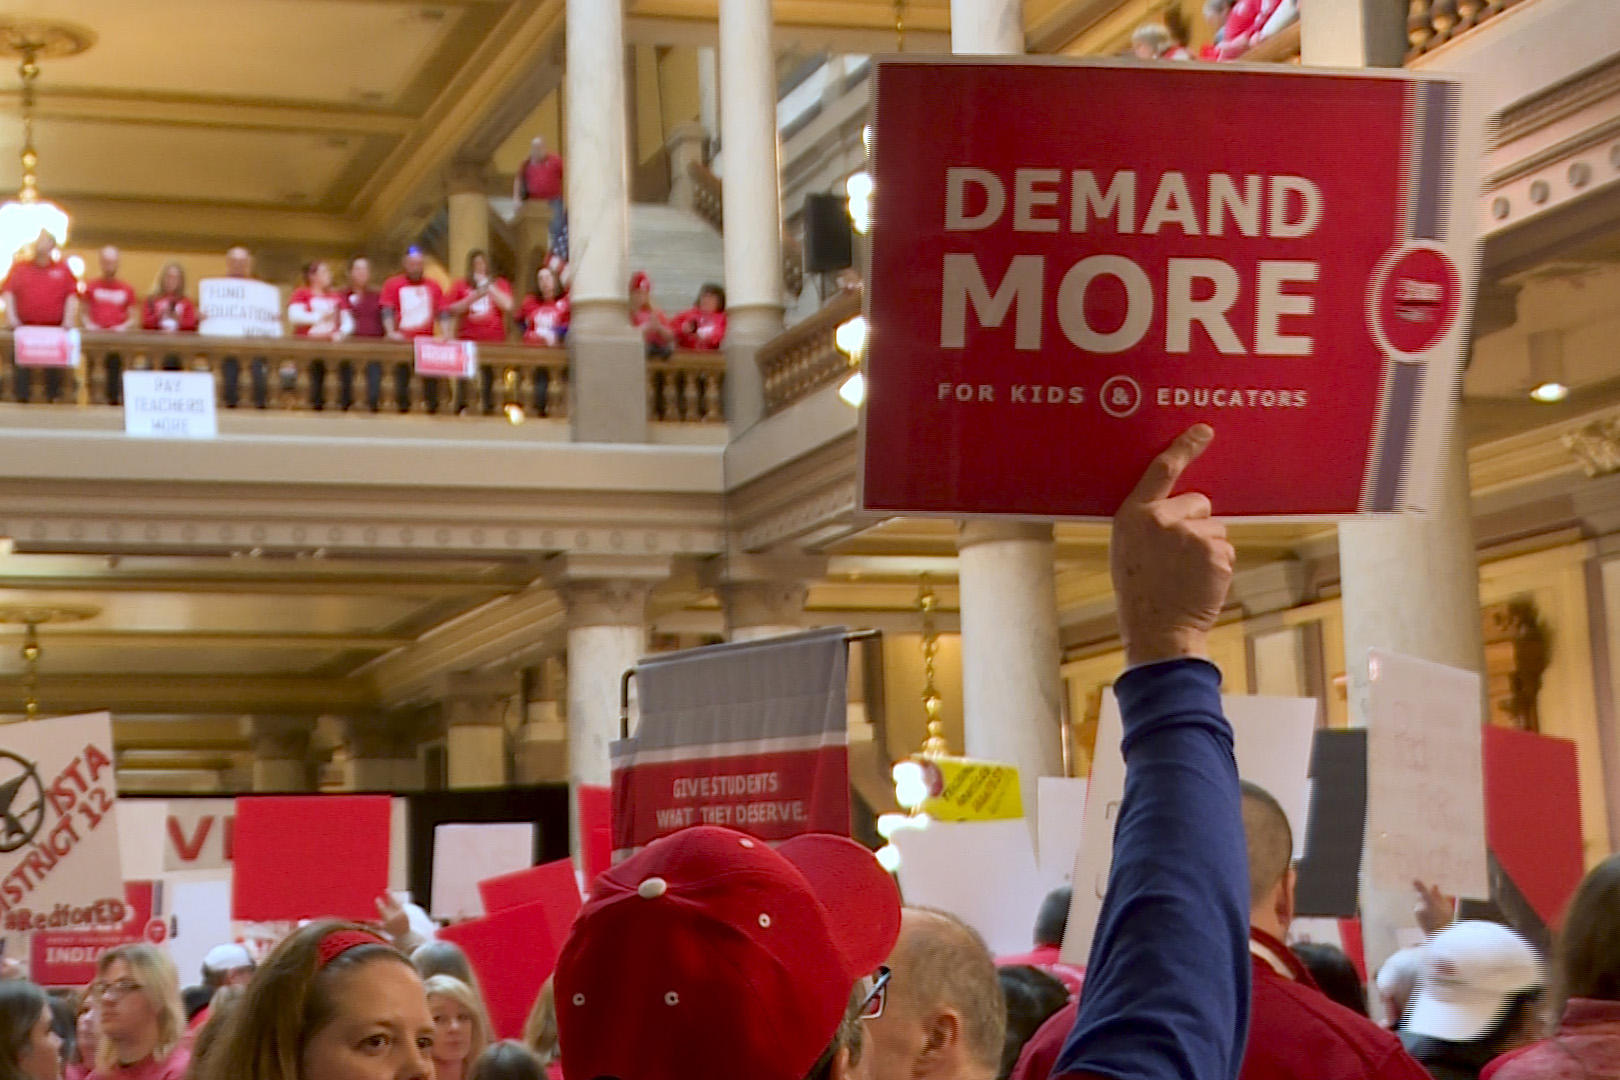 A man holds a red Demand More sign above a crowd at the Indiana Statehouse